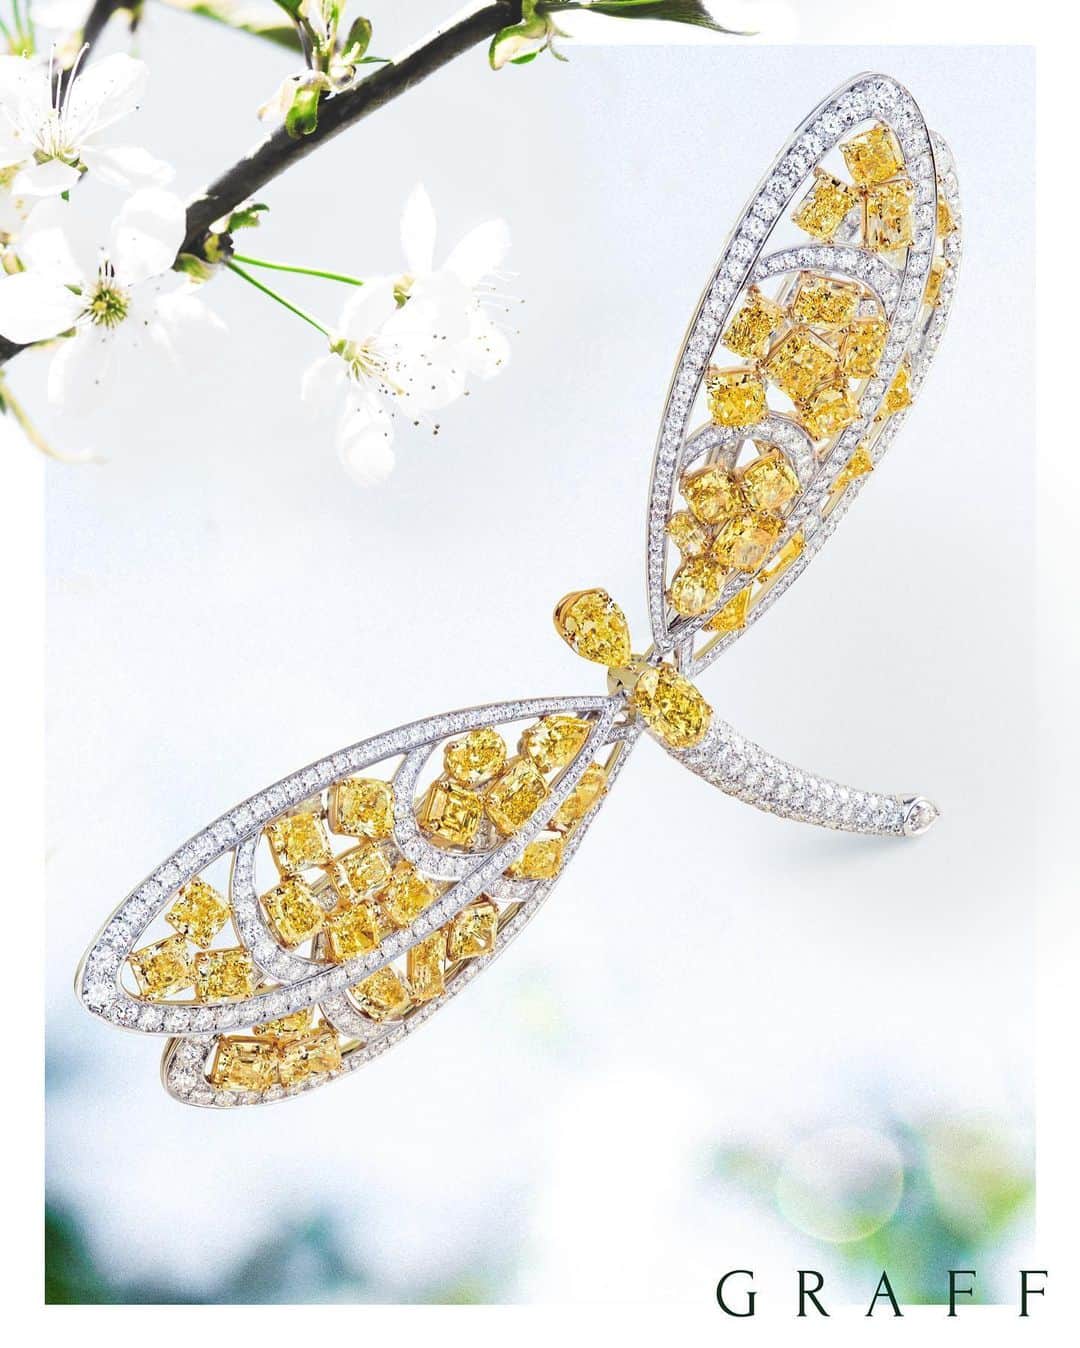 Graffさんのインスタグラム写真 - (GraffInstagram)「Spirit of Spring | Discover Graff's legacy of creating magnificent brooches. 1. A floral design showcasing four exceptional vivid yellow diamonds.  2. The famous 'Hair & Jewel' image commissioned by Mr Graff in 1970.  3. A unique floral brooch from 1980 showcasing an unparalleled collection of vivid pink diamonds.  4. Exquisite figurative brooches are a speciality of Graff.  5. A sculptural floral brooch embracing an incredibly rare collection of coloured diamonds. ⠀⠀⠀⠀⠀⠀⠀⠀⠀ ⠀⠀⠀⠀⠀⠀⠀⠀⠀ ⠀⠀⠀⠀⠀⠀⠀⠀⠀ ⠀⠀⠀⠀⠀⠀⠀⠀⠀ ⠀⠀⠀⠀⠀⠀⠀⠀⠀ ⠀⠀⠀⠀⠀⠀⠀⠀⠀ ⠀⠀⠀⠀⠀⠀⠀⠀⠀ ⠀⠀⠀⠀⠀⠀⠀⠀⠀ ⠀⠀⠀⠀⠀⠀⠀⠀⠀ ⠀⠀⠀⠀⠀⠀⠀⠀⠀ ⠀⠀⠀⠀⠀⠀⠀⠀⠀ ⠀⠀⠀⠀⠀⠀⠀⠀⠀ ⠀⠀⠀⠀⠀⠀⠀⠀⠀ ⠀⠀⠀⠀ #GraffDiamonds #HighJewelry #SpiritofSpring #FallinLoveWithGraff」5月22日 21時22分 - graff